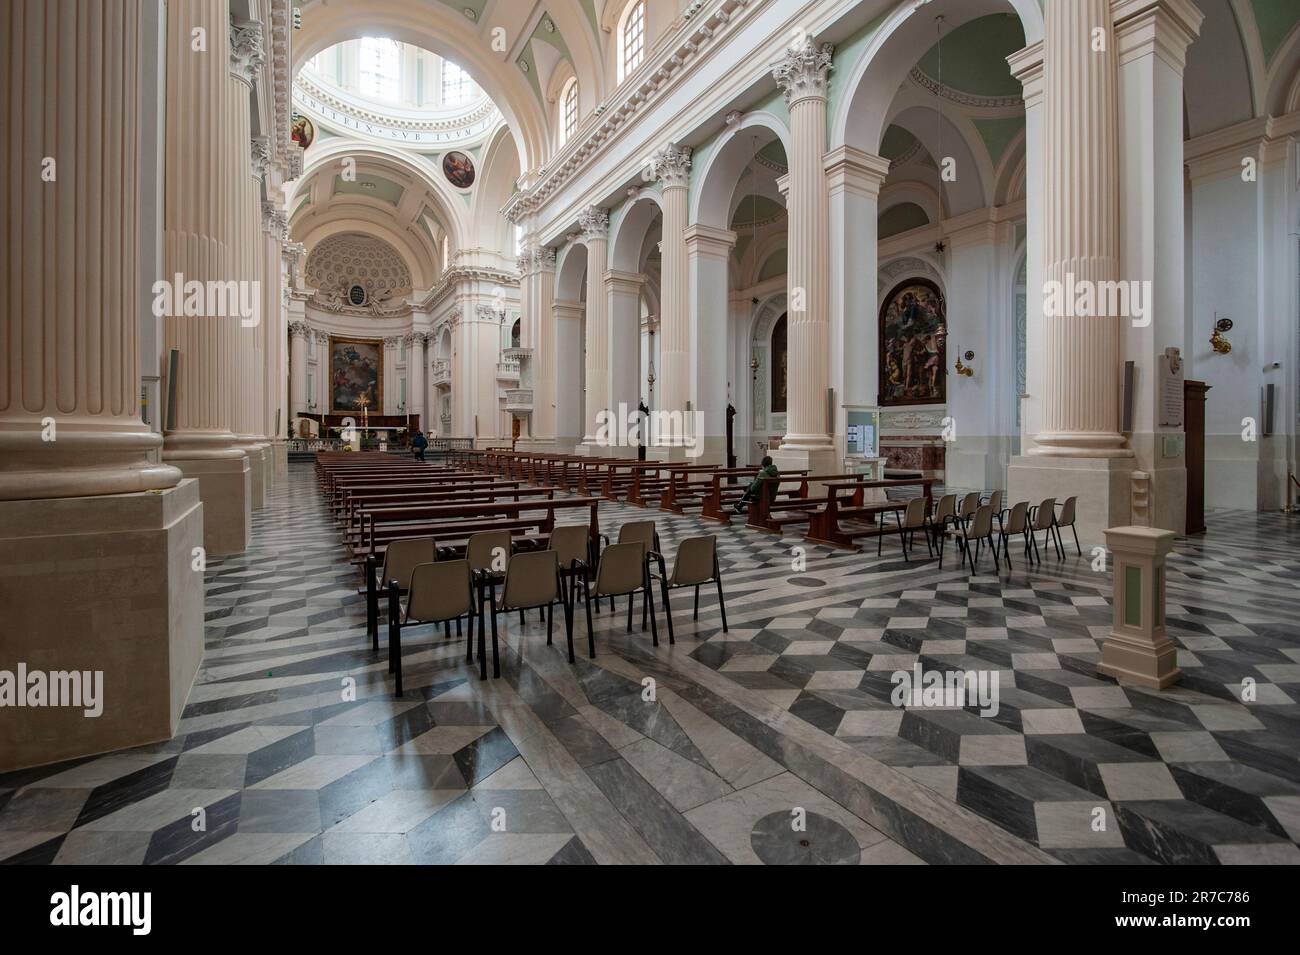 Santa Maria Assunta cathedral interior, is a fine example of the neoclassical style, Latin cross plan, with three white naves. Stock Photo